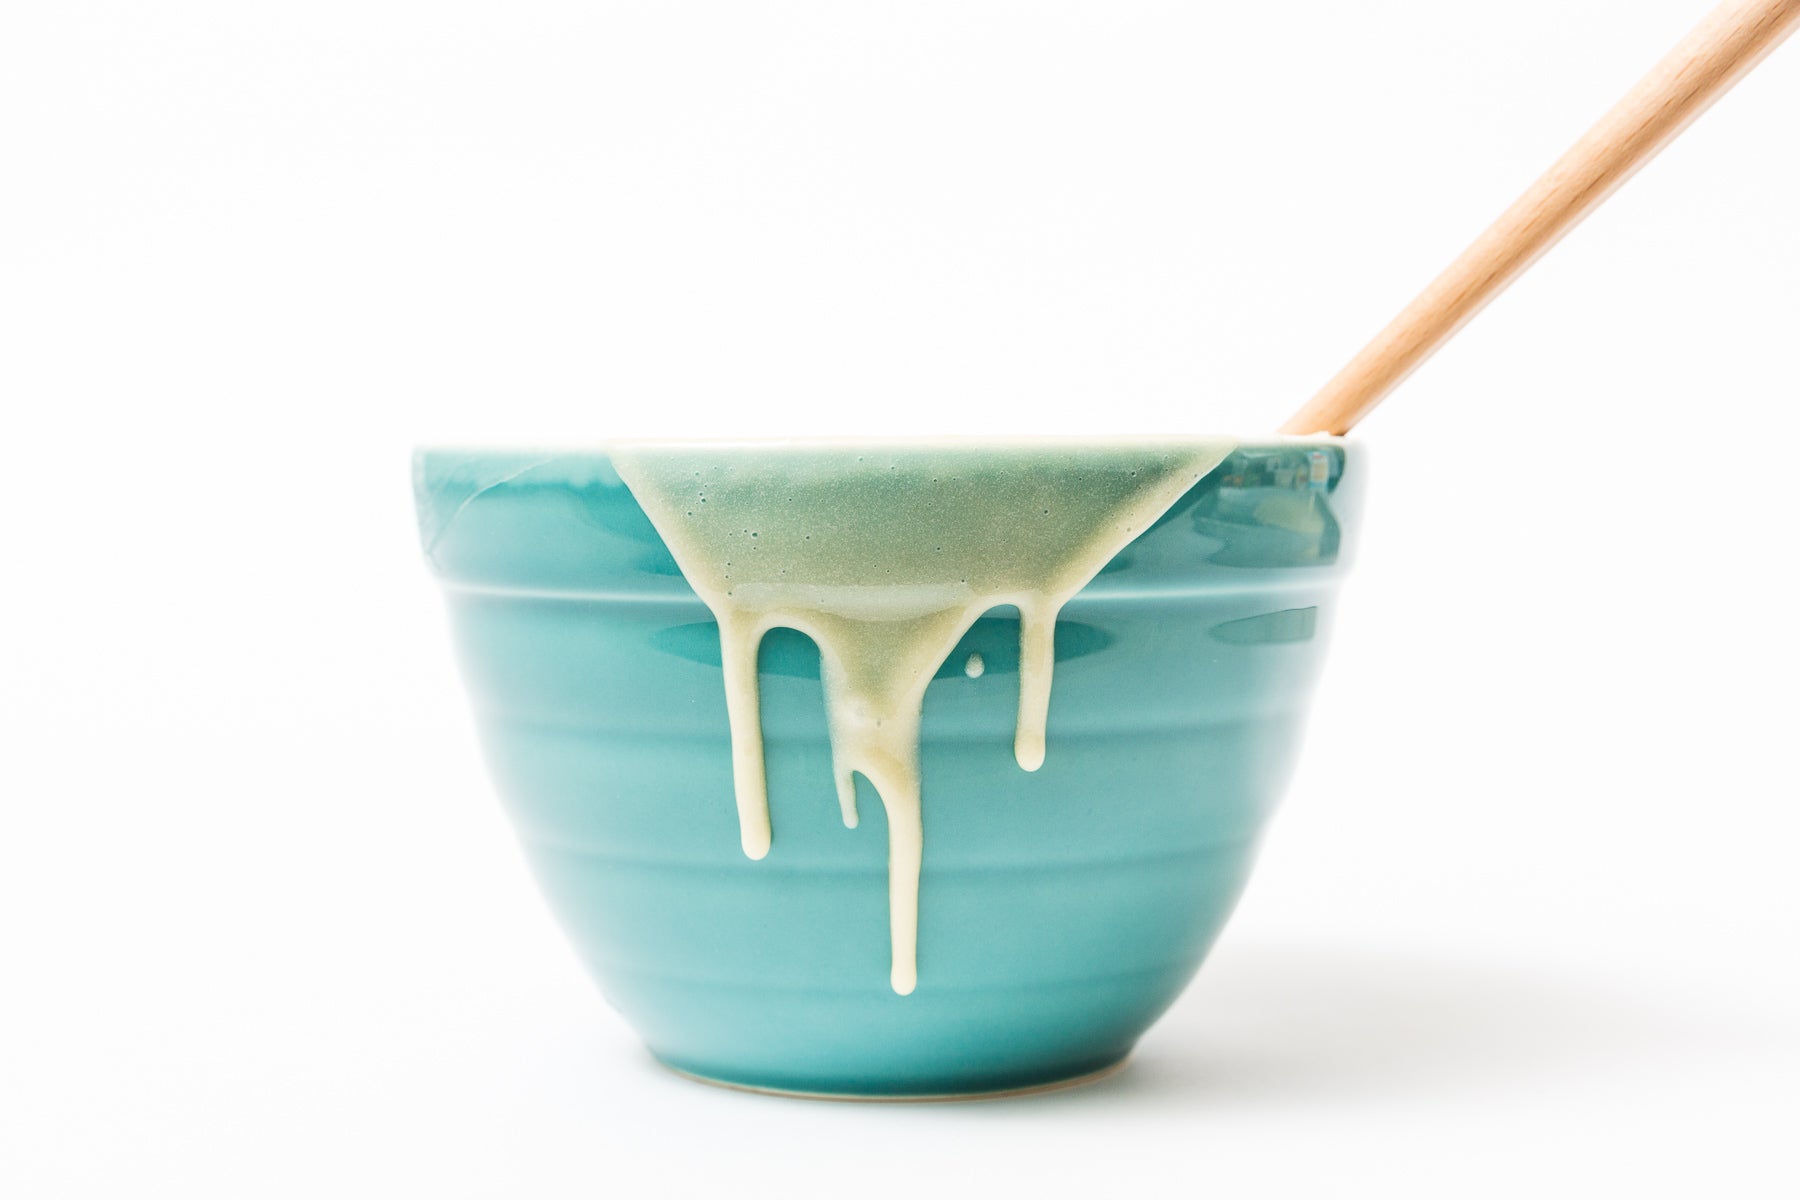 Image of side of Miss Jones Baking Co Confetti Pop Mini Cakes cake mix dripping down side of blue mixing bowl.